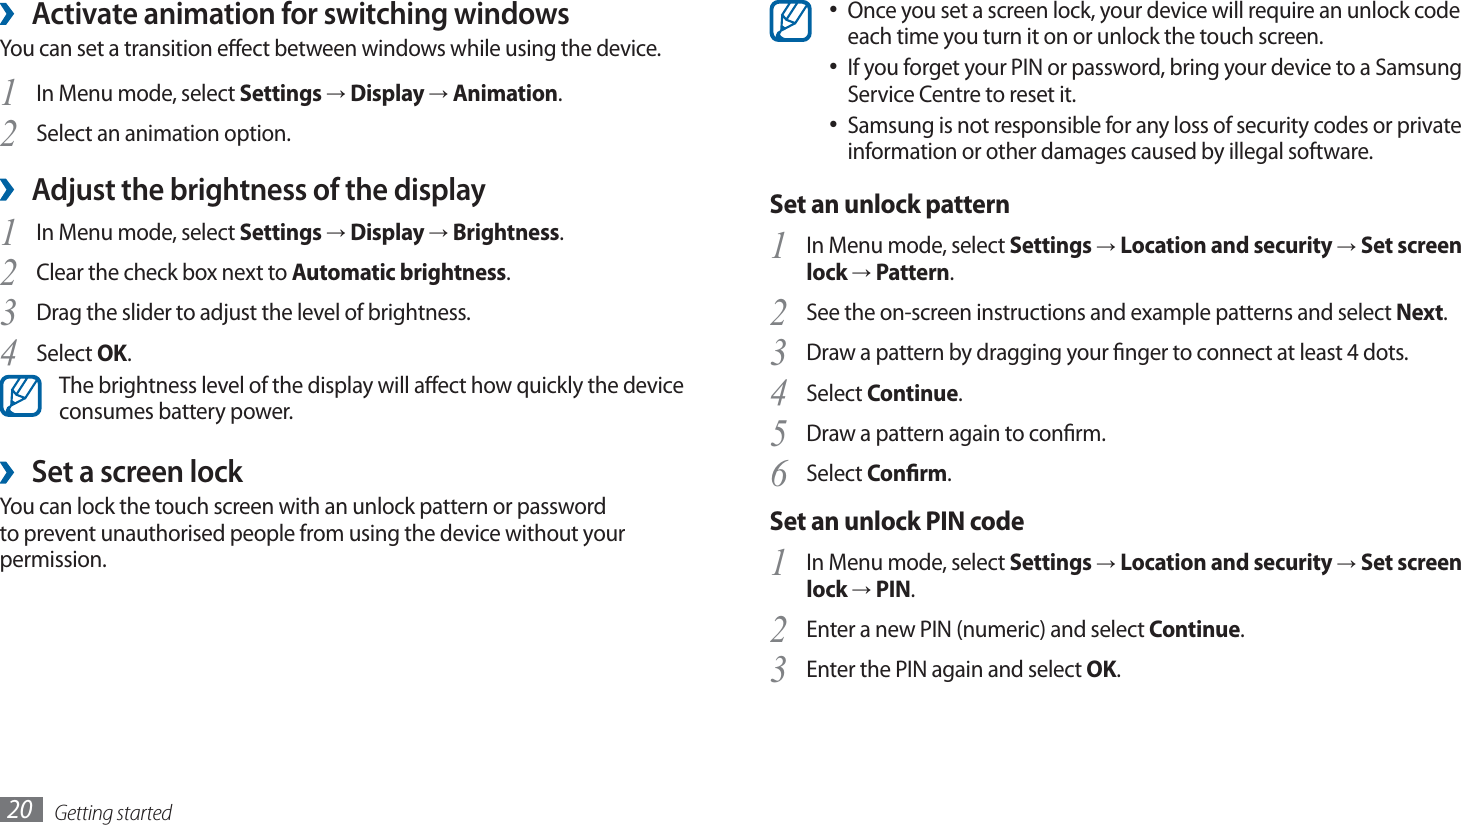 Getting started20Once you set a screen lock, your device will require an unlock code • each time you turn it on or unlock the touch screen.If you forget your PIN or password, bring your device to a Samsung • Service Centre to reset it.Samsung is not responsible for any loss of security codes or private • information or other damages caused by illegal software.Set an unlock patternIn Menu mode, select 1 Settings → Location and security → Set screen lock → Pattern.See the on-screen instructions and example patterns and select 2 Next.Draw a pattern by dragging your nger to connect at least 4 dots.3 Select 4 Continue.Draw a pattern again to conrm.5 Select 6 Conrm.Set an unlock PIN codeIn Menu mode, select 1 Settings → Location and security → Set screen lock → PIN.Enter a new PIN (numeric) and select 2 Continue.Enter the PIN again and select 3 OK.Activate animation for switching windows ›You can set a transition eect between windows while using the device.In Menu mode, select 1 Settings → Display → Animation.Select an animation option.2 Adjust the brightness of the display ›In Menu mode, select 1 Settings → Display → Brightness.Clear the check box next to 2 Automatic brightness.Drag the slider3  to adjust the level of brightness.Select 4 OK.The brightness level of the display will aect how quickly the device consumes battery power. ›Set a screen lockYou can lock the touch screen with an unlock pattern or password to prevent unauthorised people from using the device without your permission.